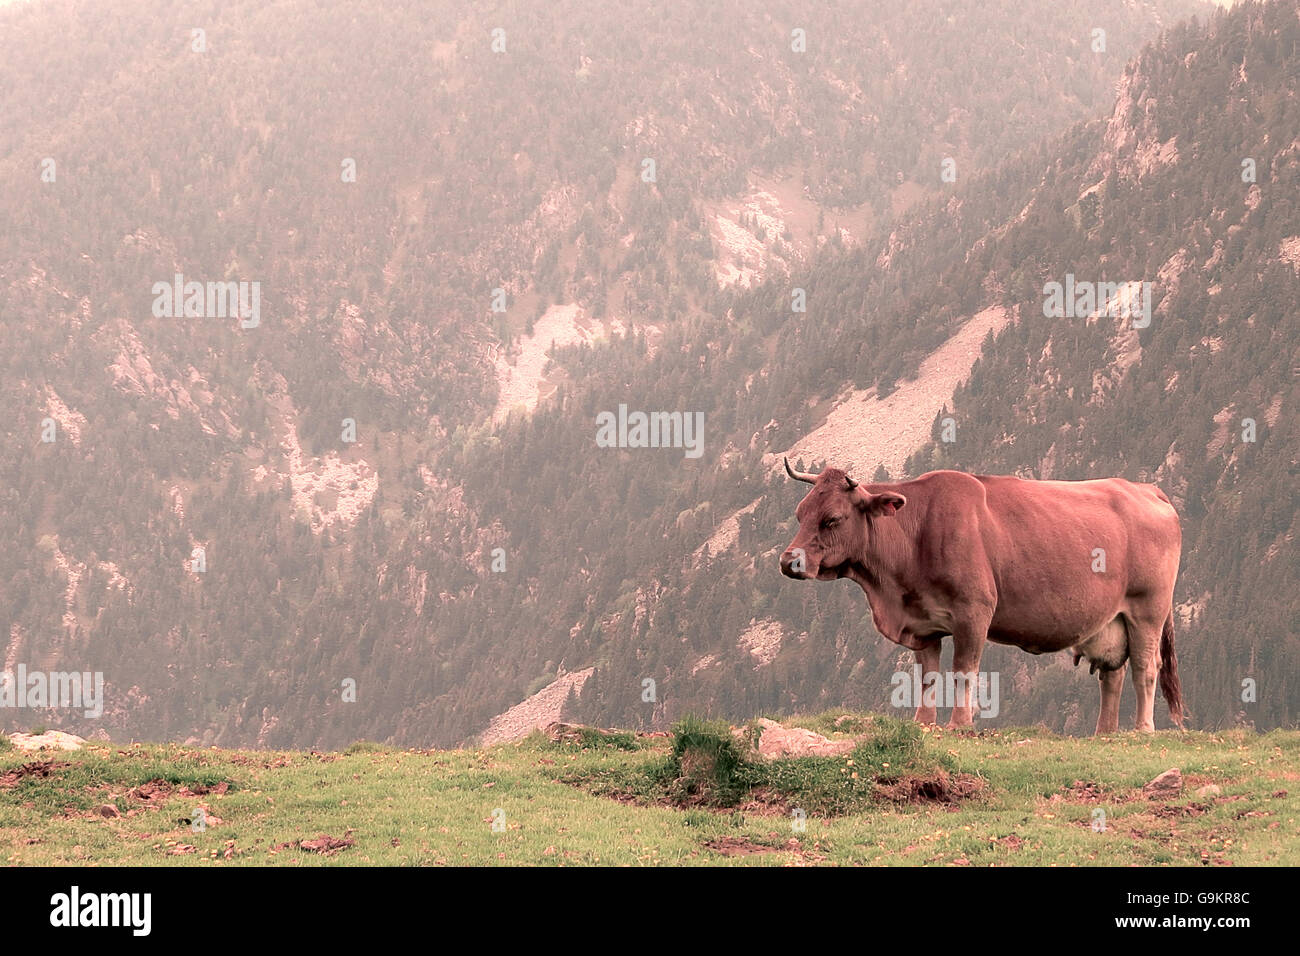 One long-horn cow standing in a green meadow with mountain views. Stock Photo